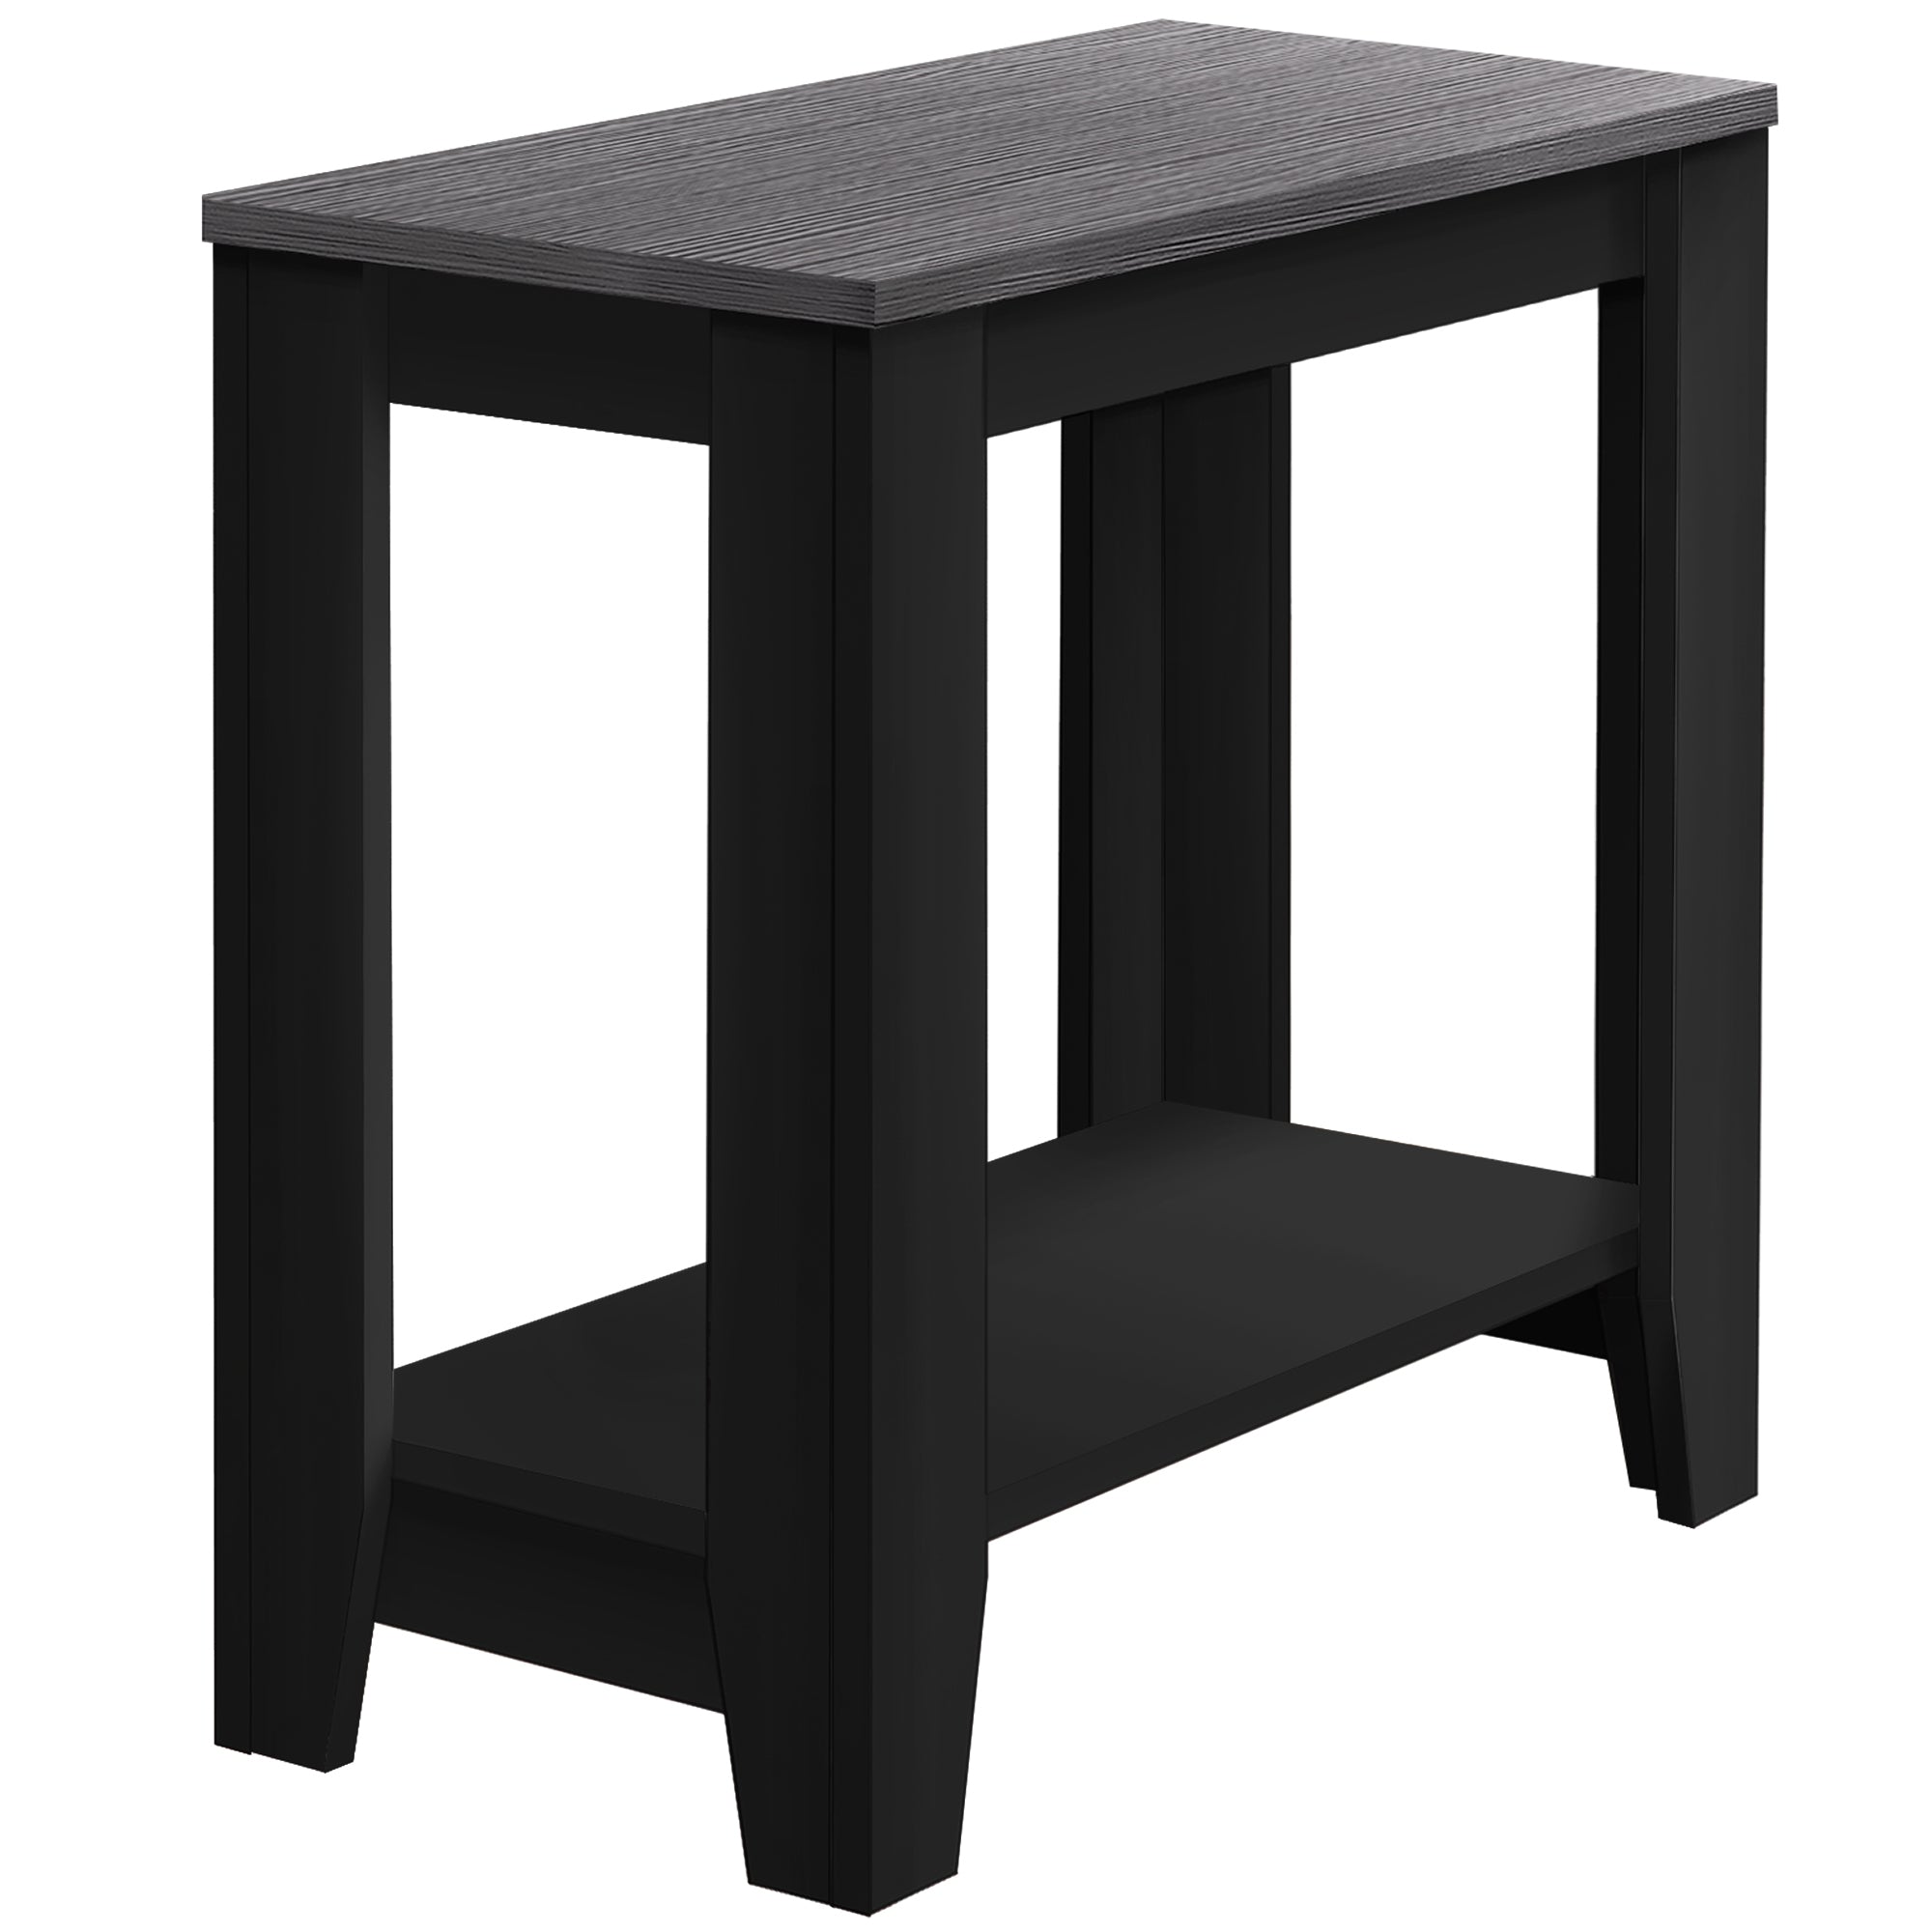 Accent Table - Black / Grey Top